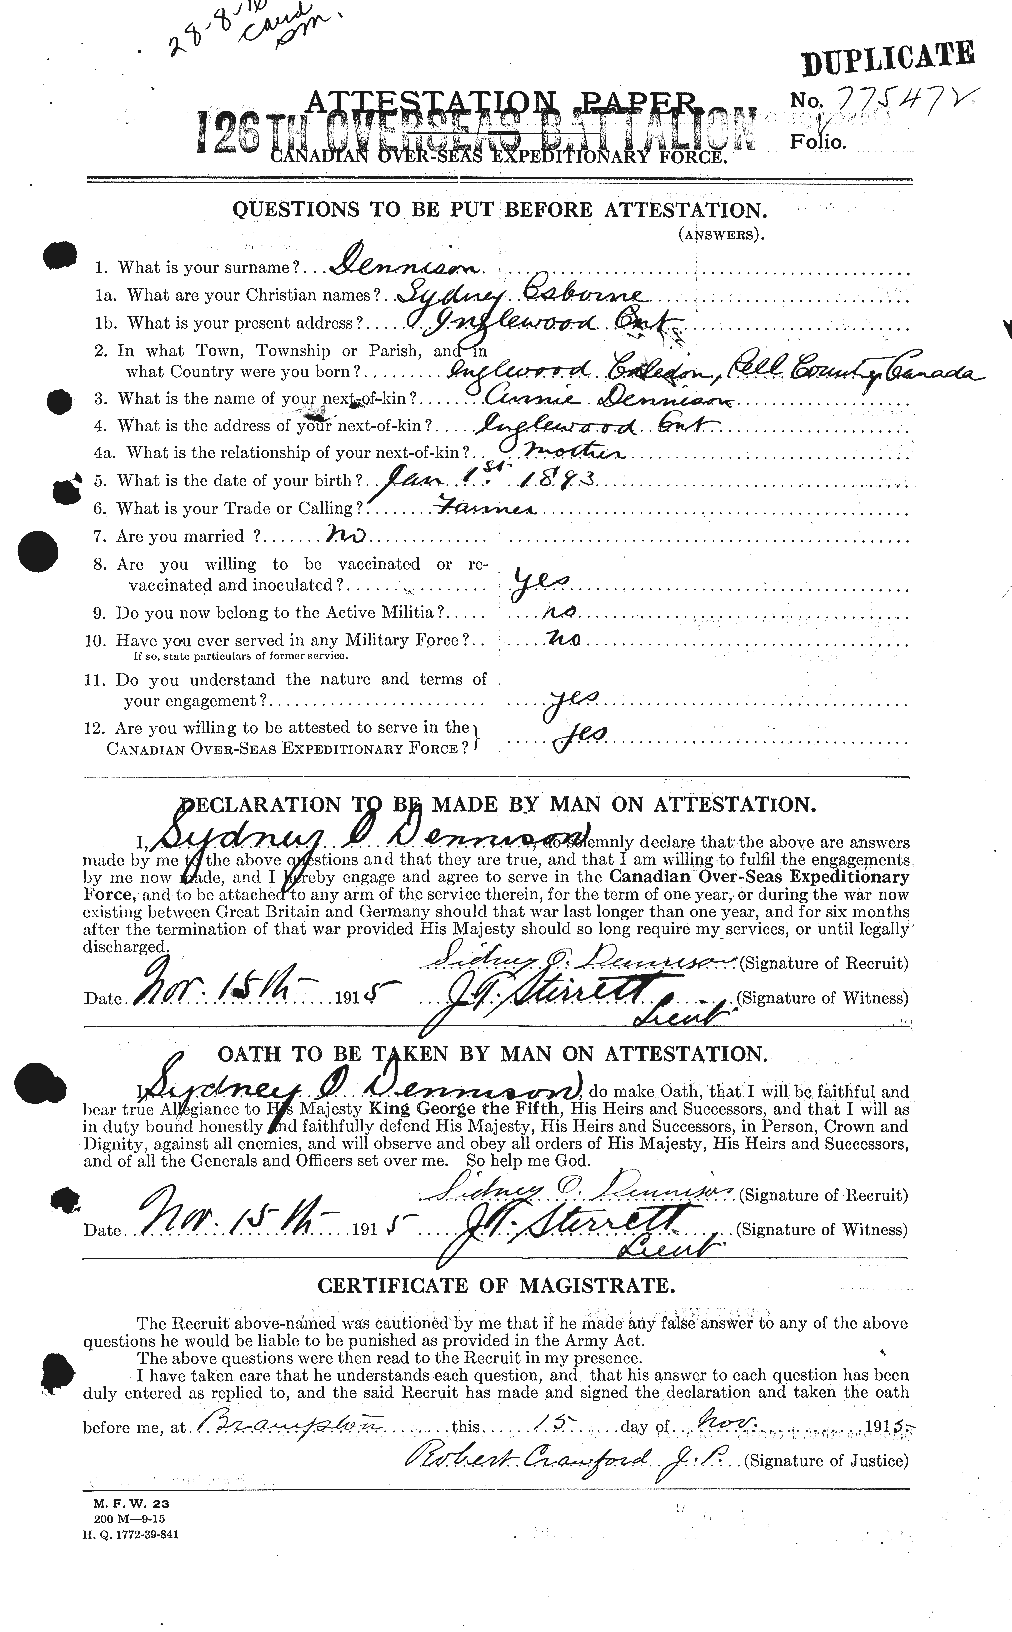 Personnel Records of the First World War - CEF 286330a